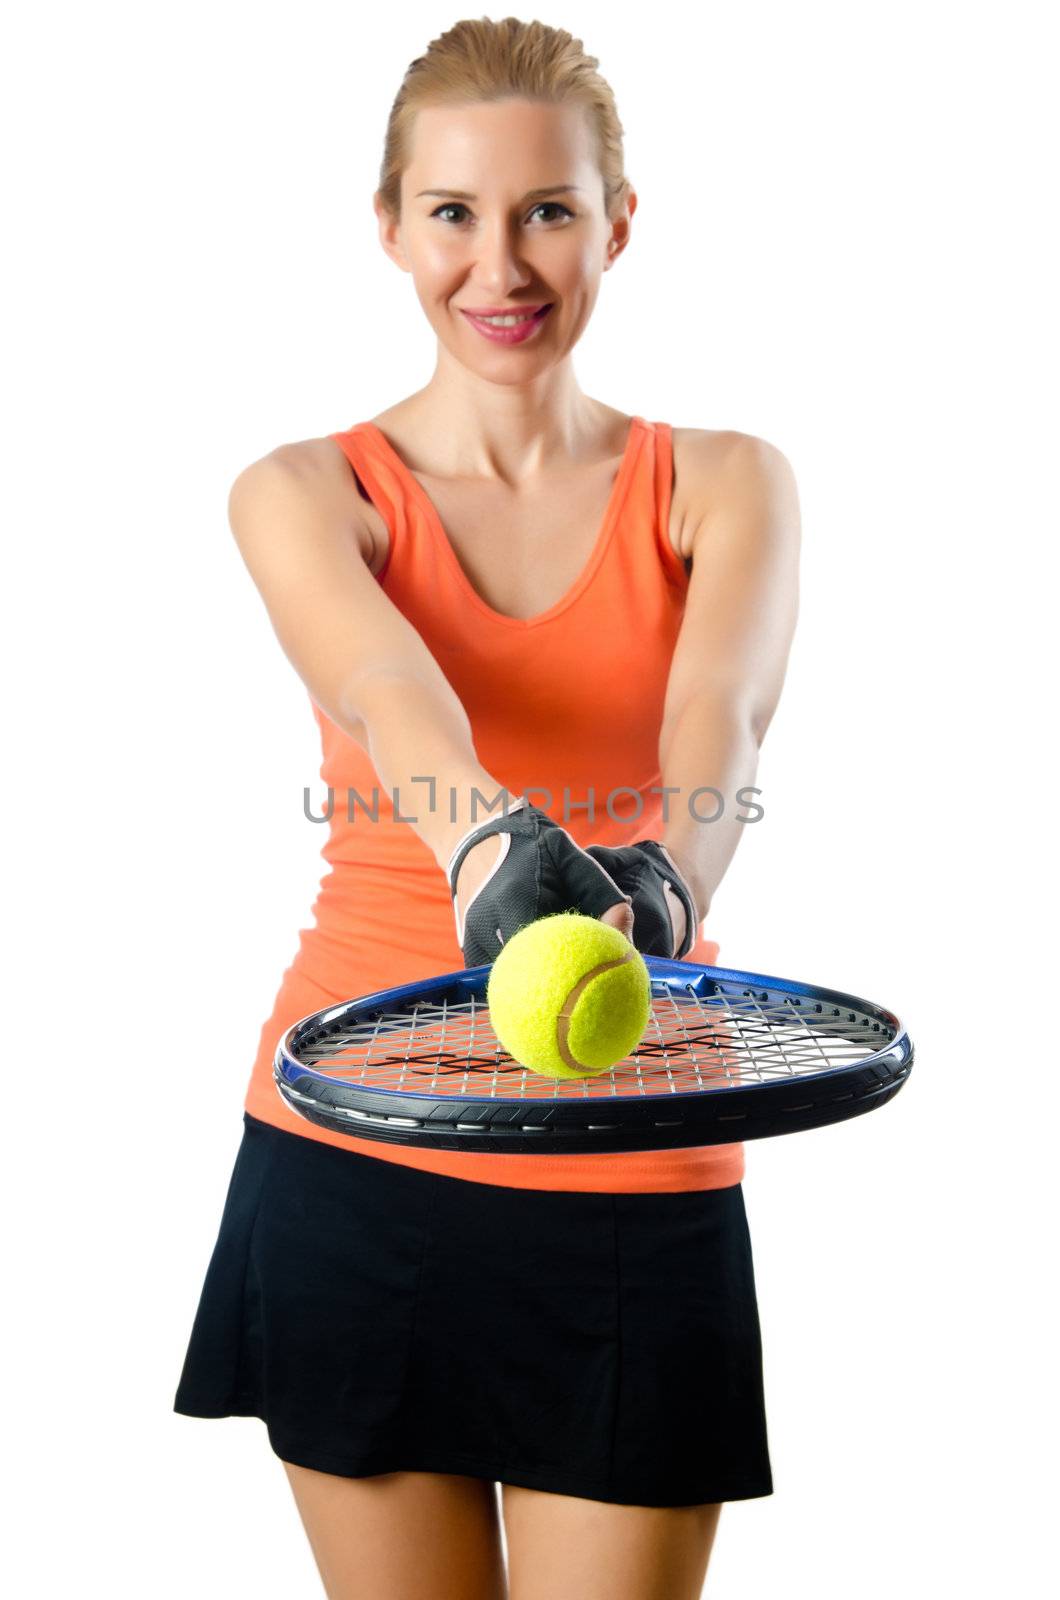 Woman tennis player on white by Elnur